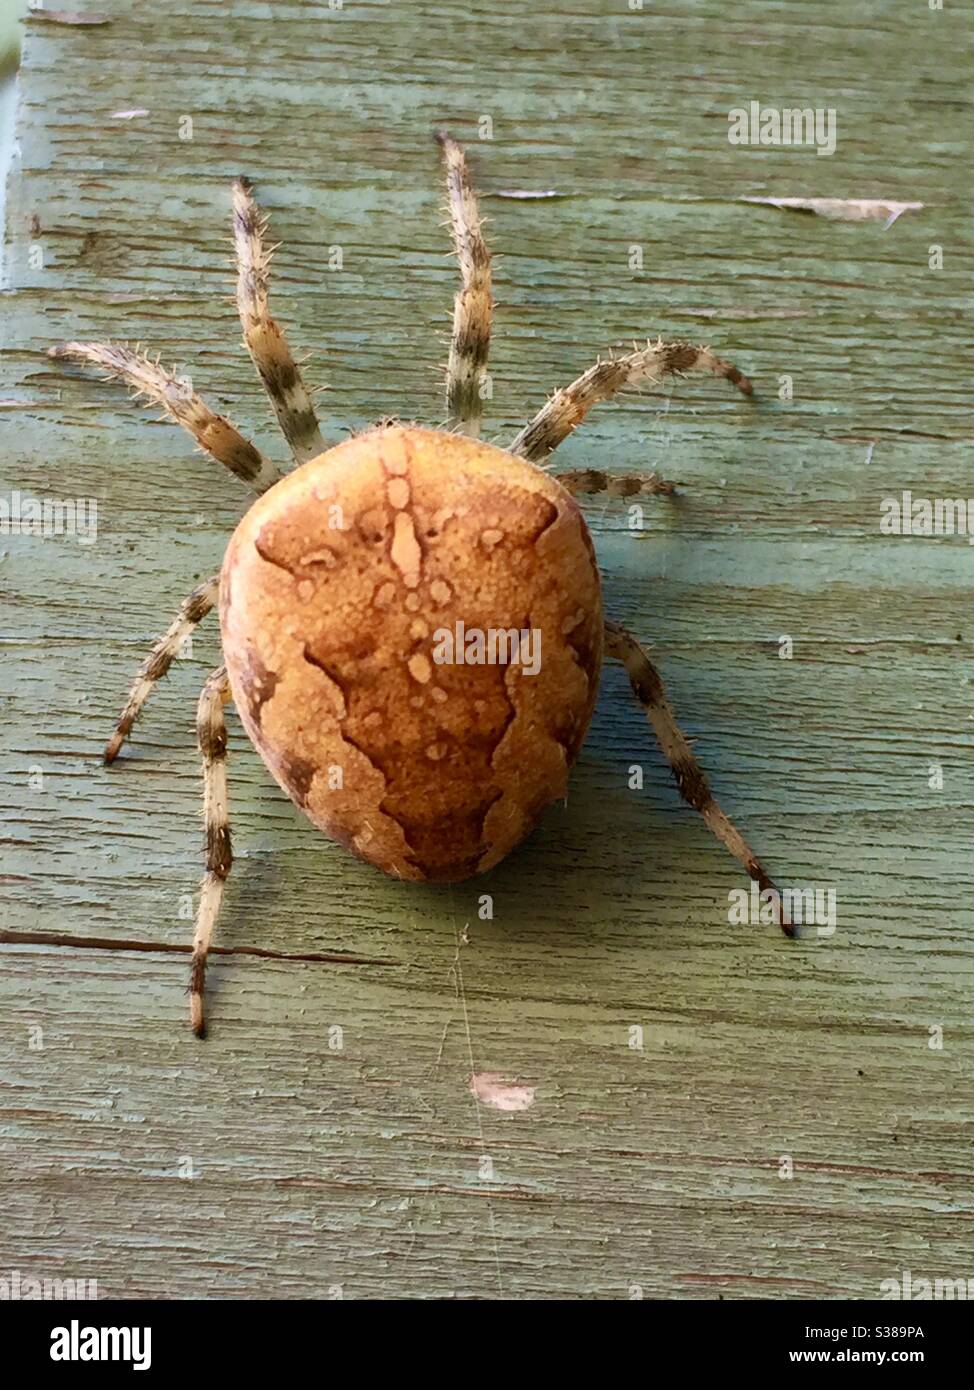 Patterned spider with striped legs Stock Photo